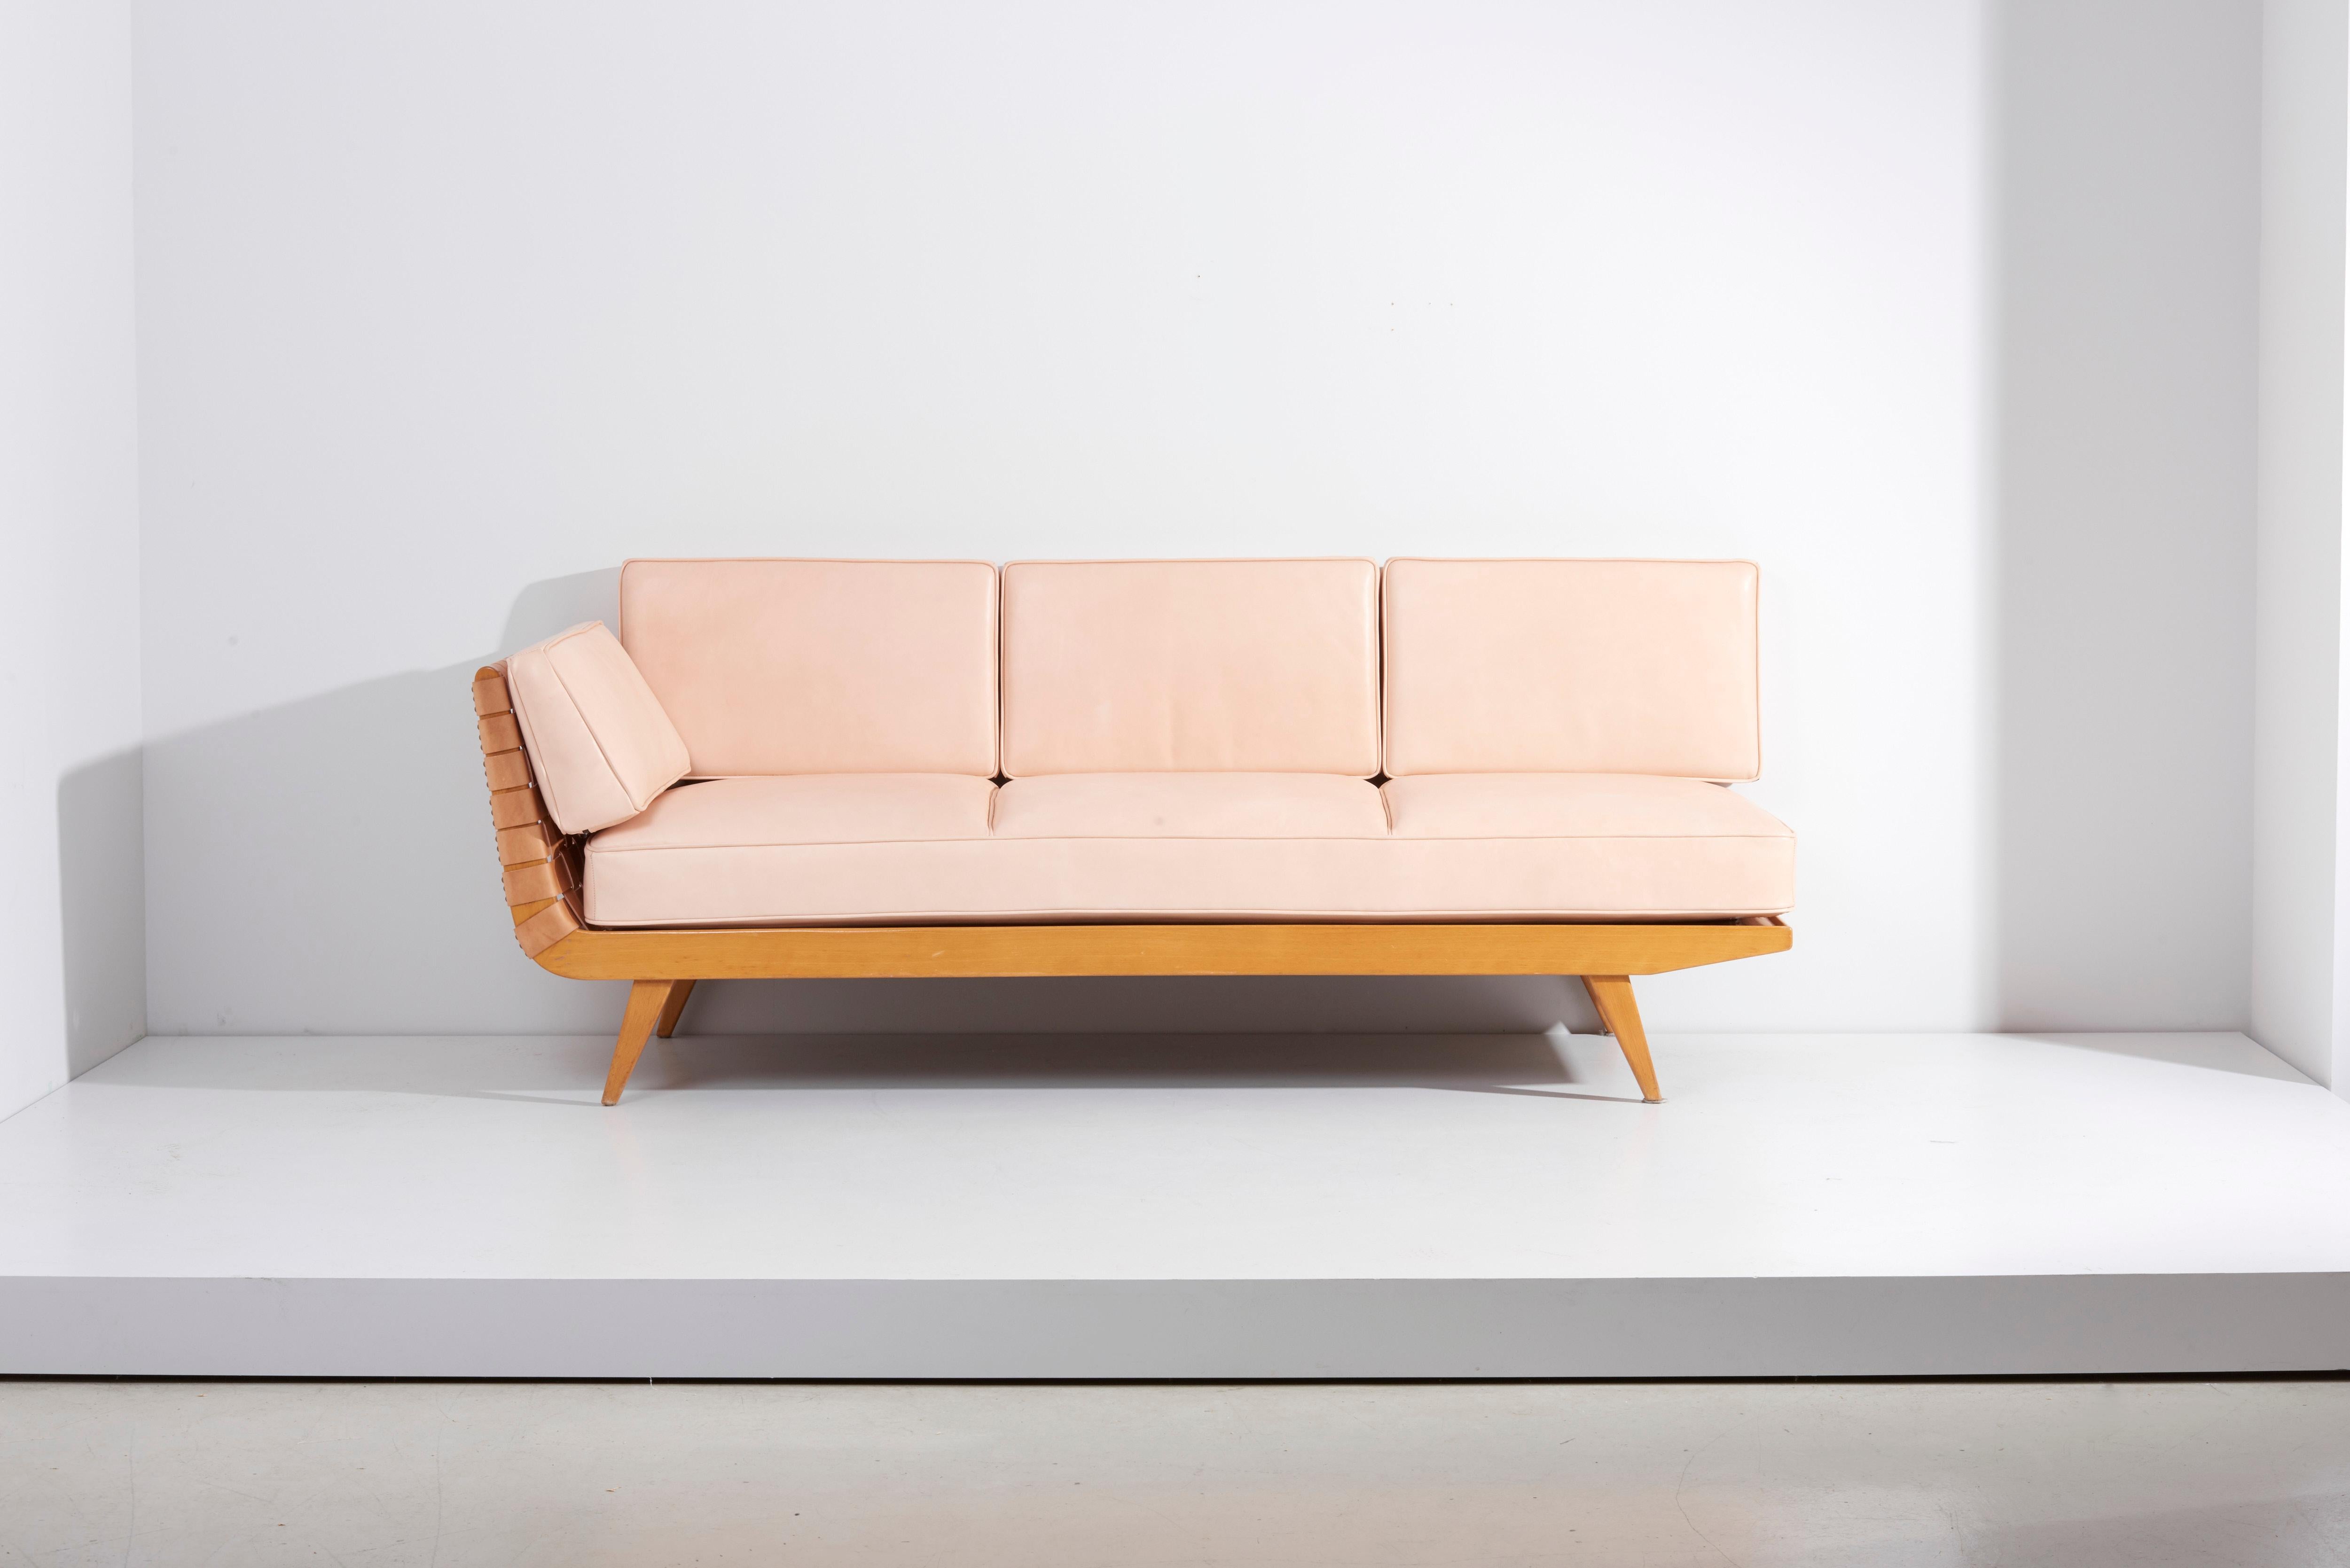 Newly upholstered daybed by Jens Risom for Walter Knoll 1950s in leather
Designed by Jens Risom in 1940s-1950s and produced by Walter Knoll for the Vostra Series.
Wooden base and newly upholstered in light leather that will darken with time. The